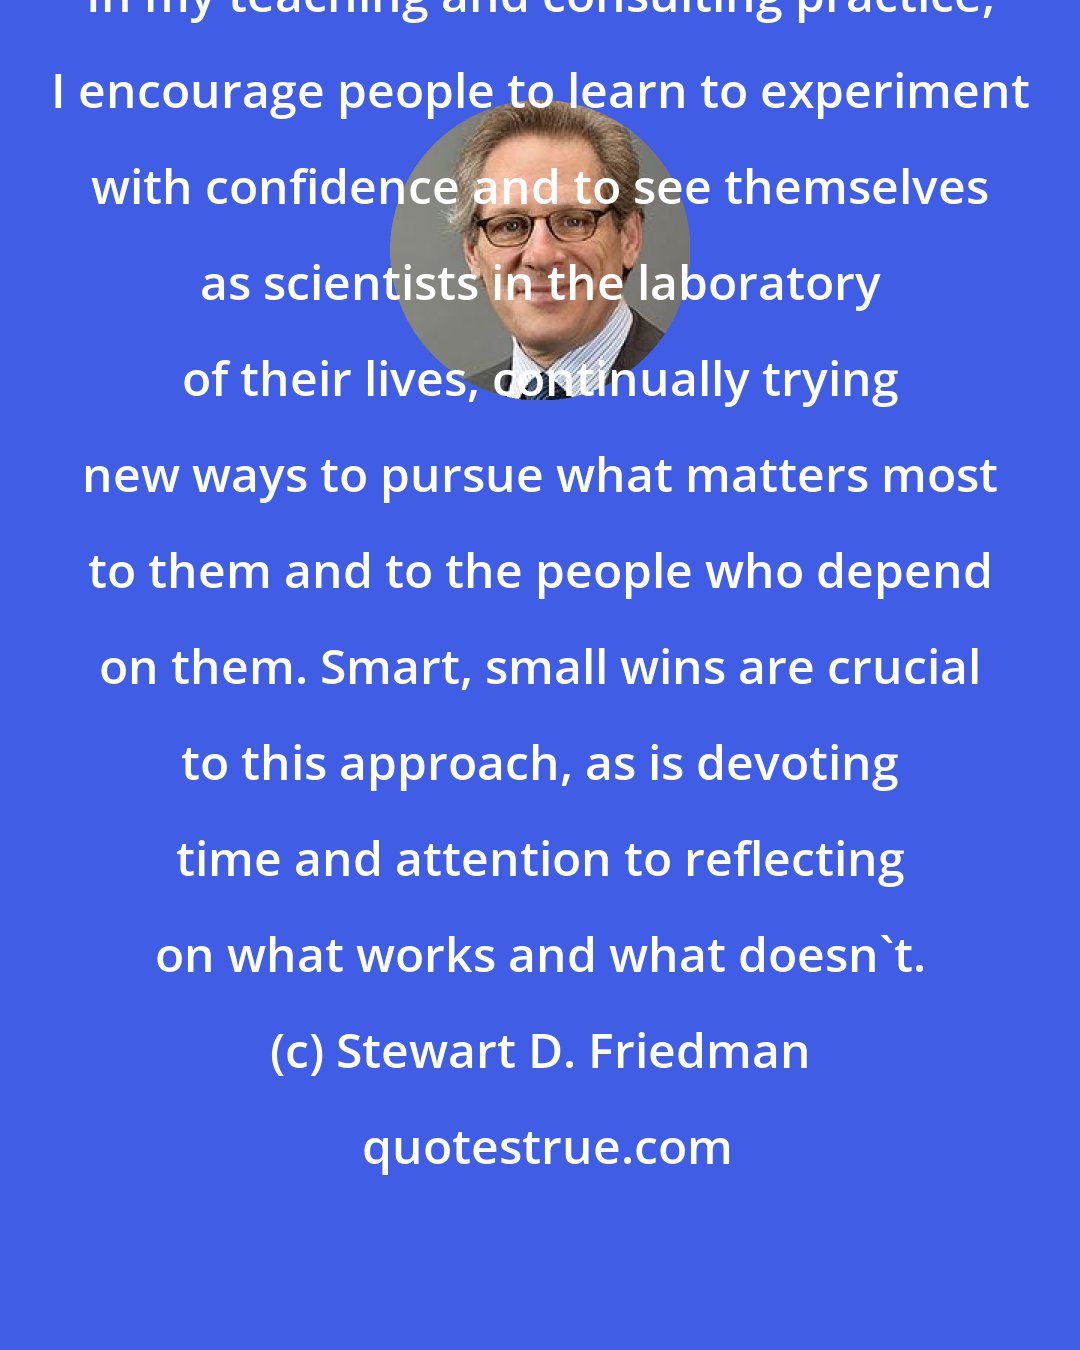 Stewart D. Friedman: In my teaching and consulting practice, I encourage people to learn to experiment with confidence and to see themselves as scientists in the laboratory of their lives, continually trying new ways to pursue what matters most to them and to the people who depend on them. Smart, small wins are crucial to this approach, as is devoting time and attention to reflecting on what works and what doesn't.